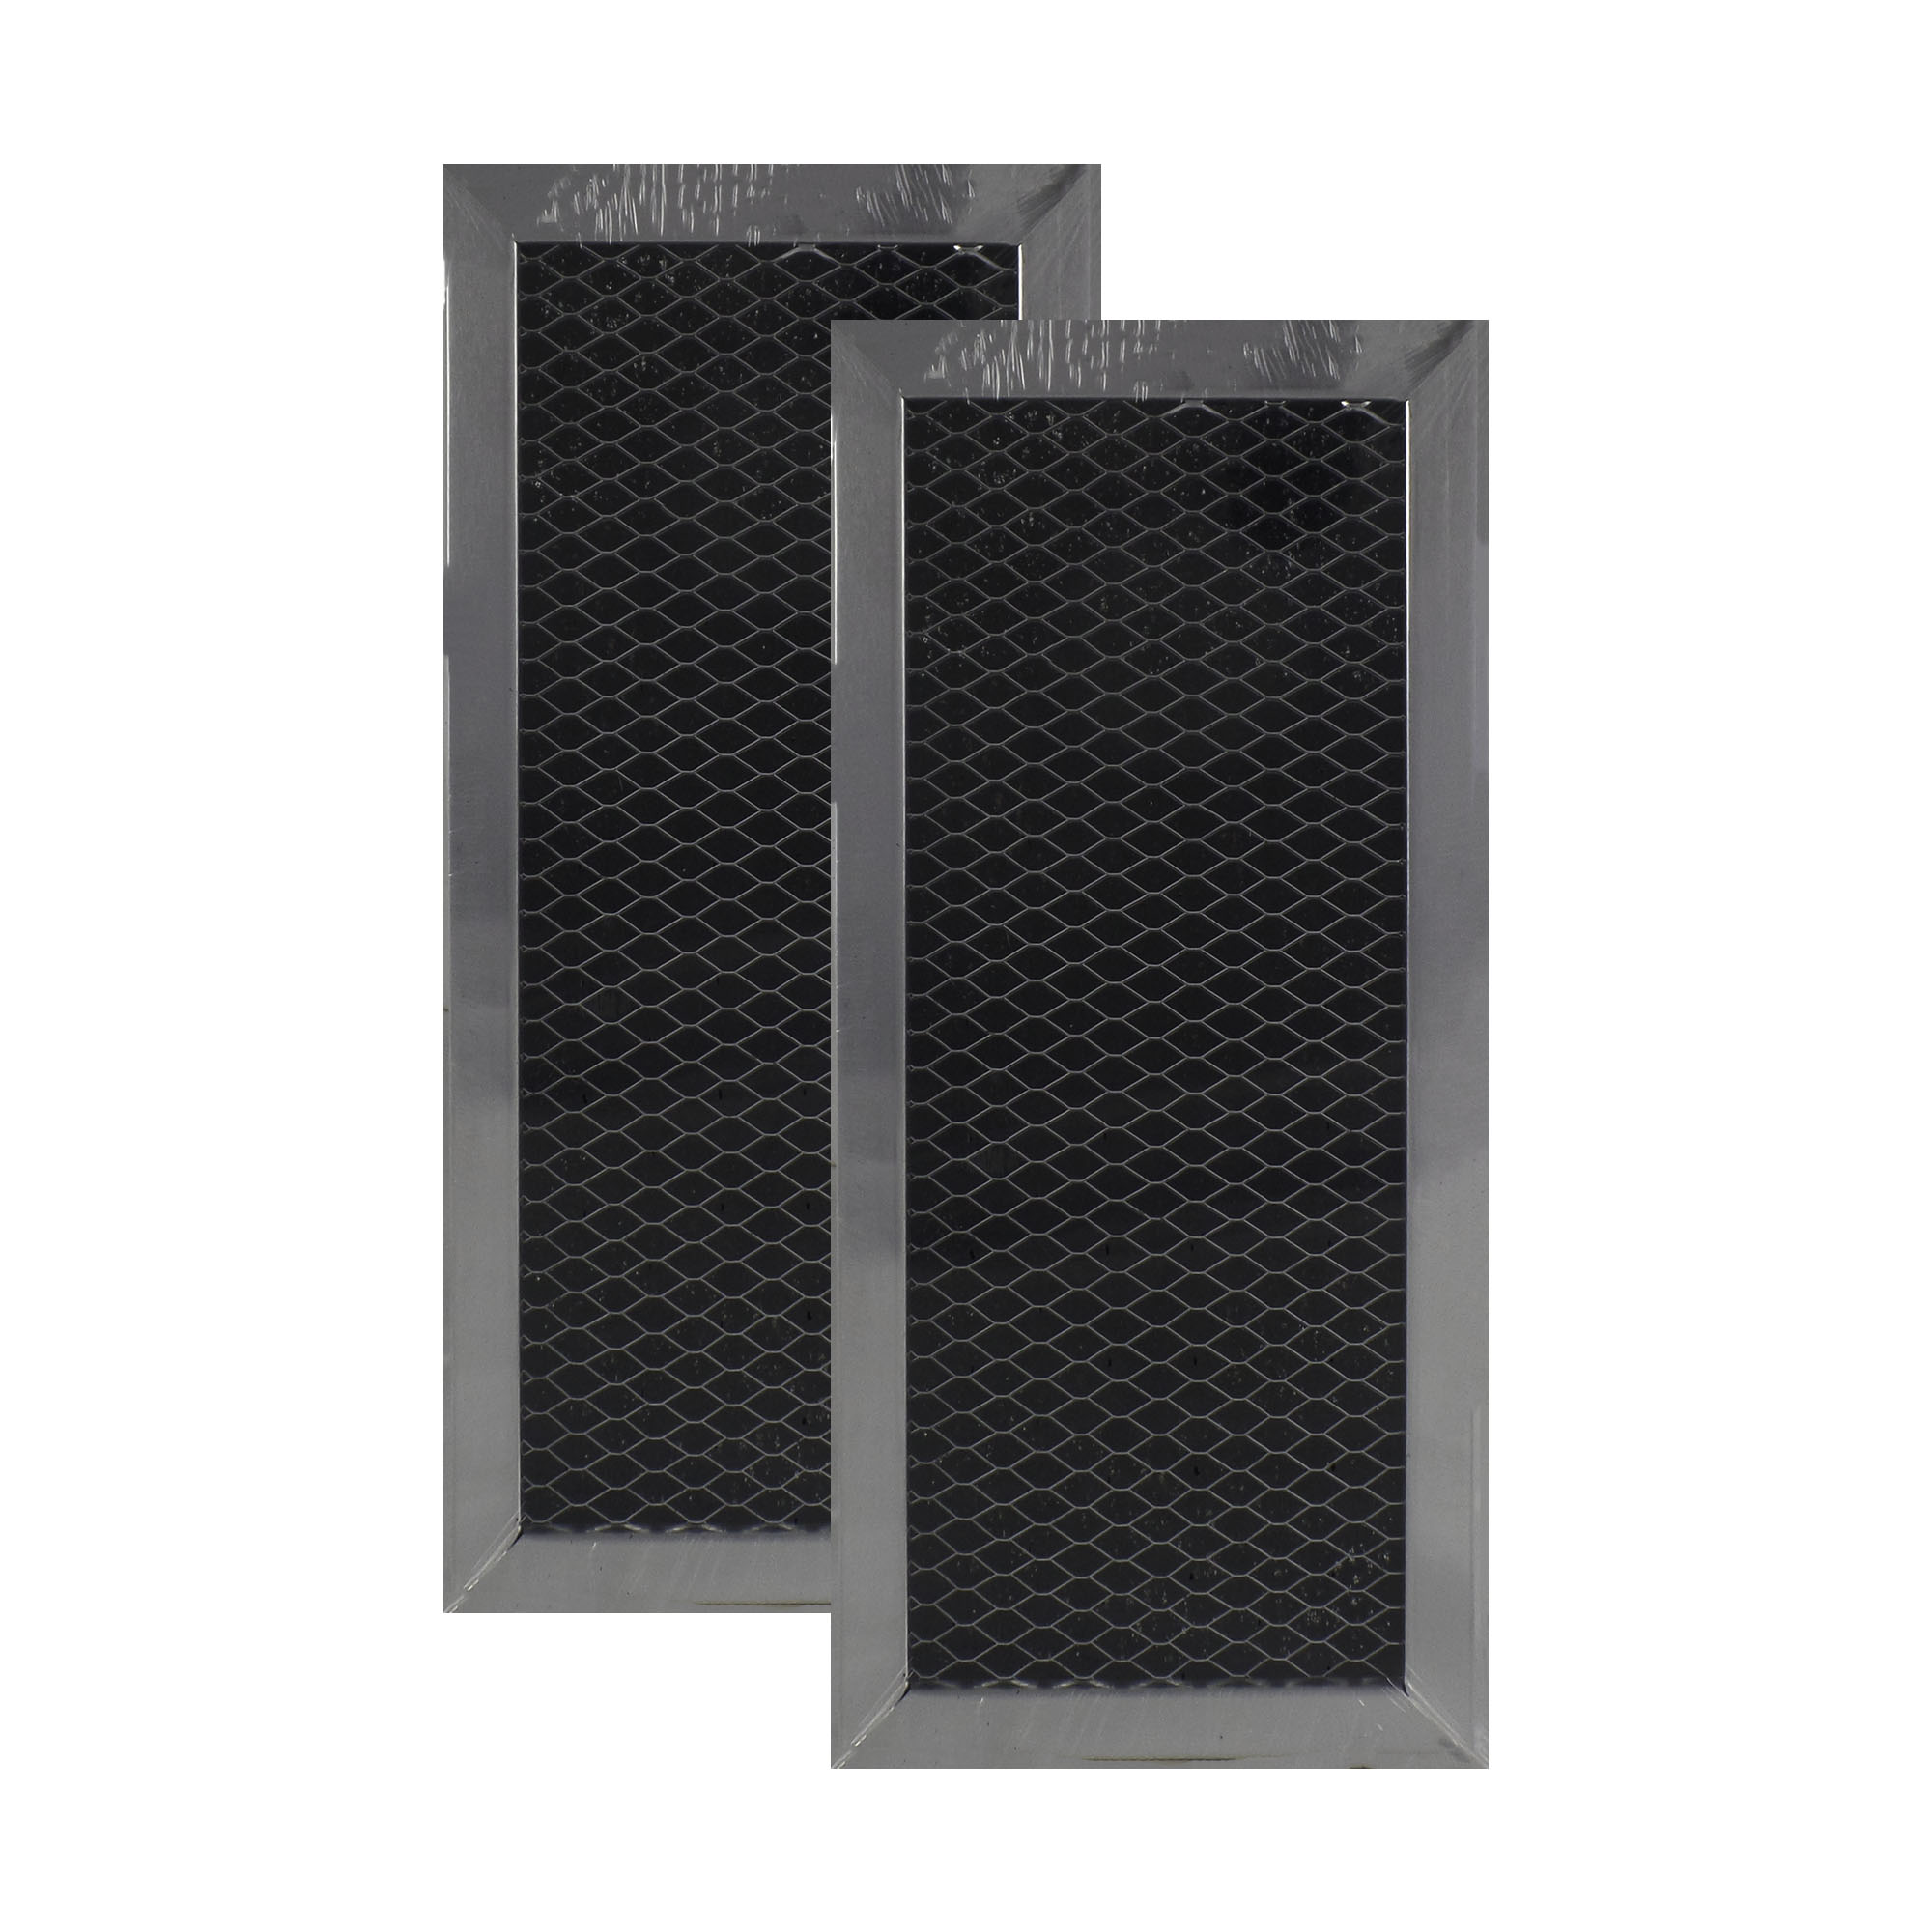 2 PACK 2309683 Samsung Microwave Oven Aluminum Grease Filter Replacements by Air Filter Factory 